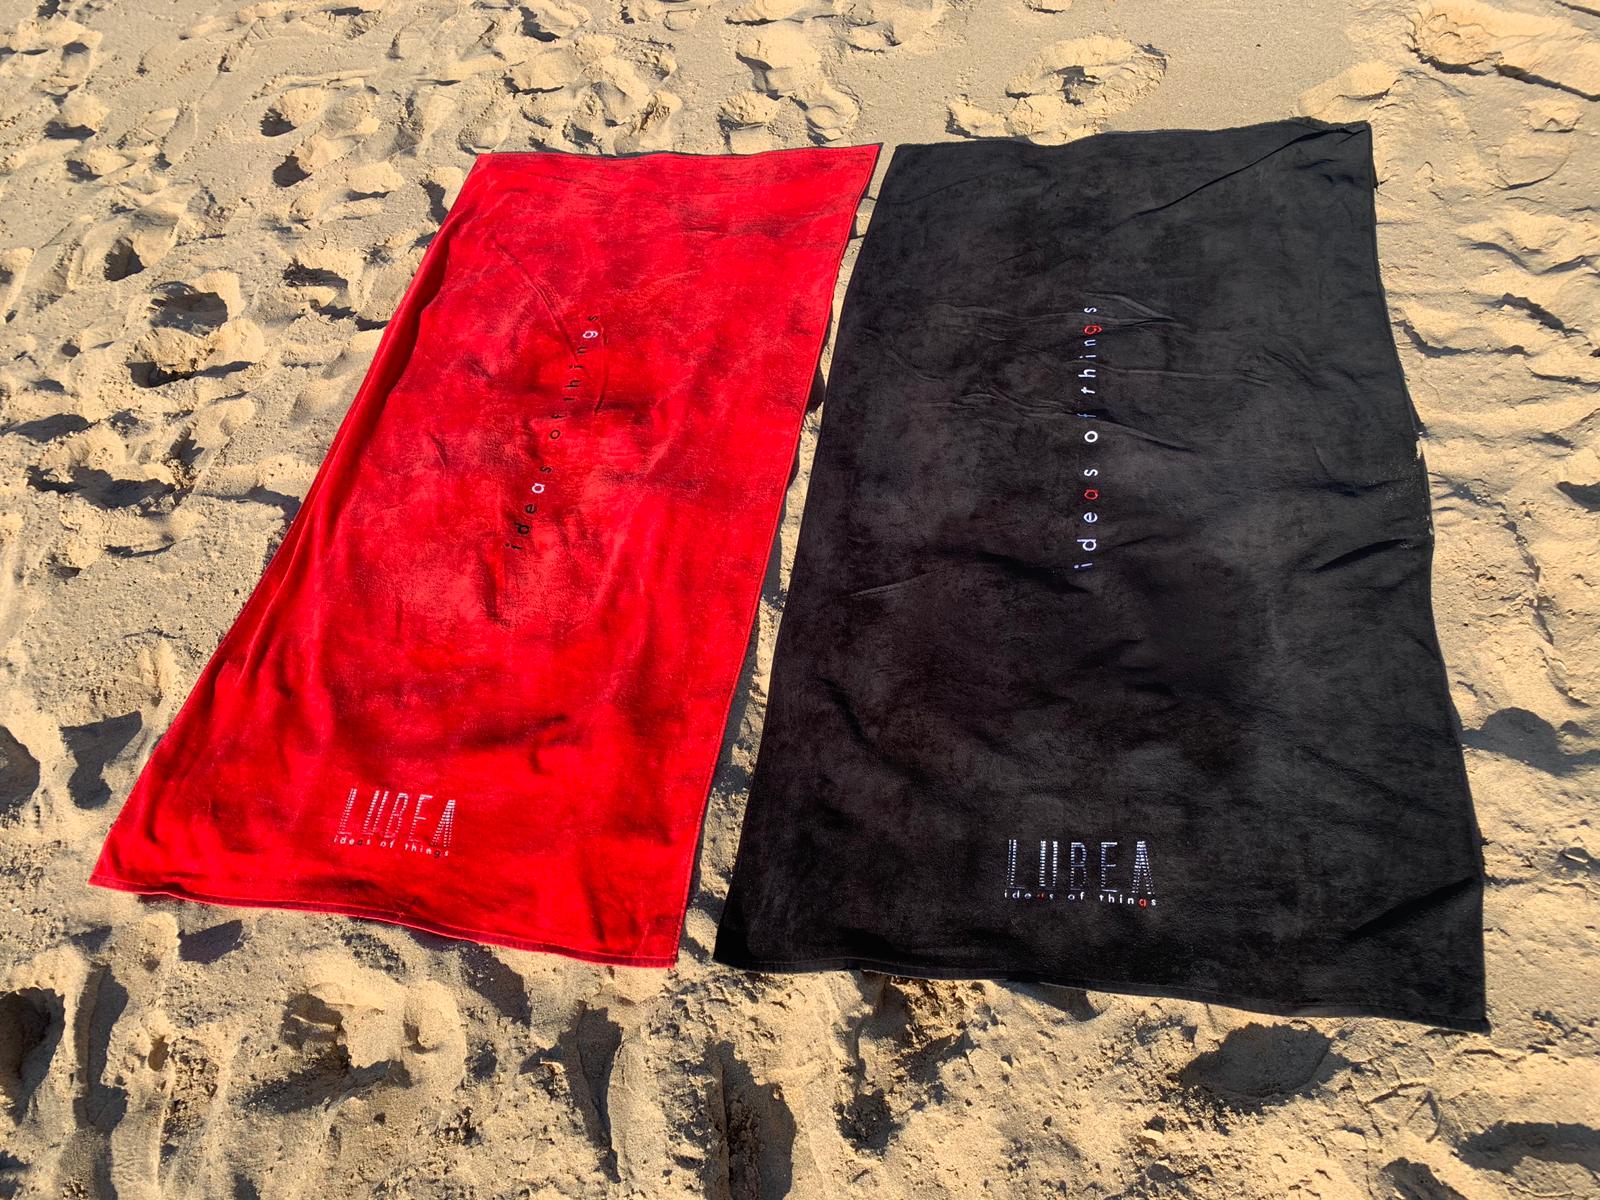 Welcome to summer season with LUBEA’s beach towels!